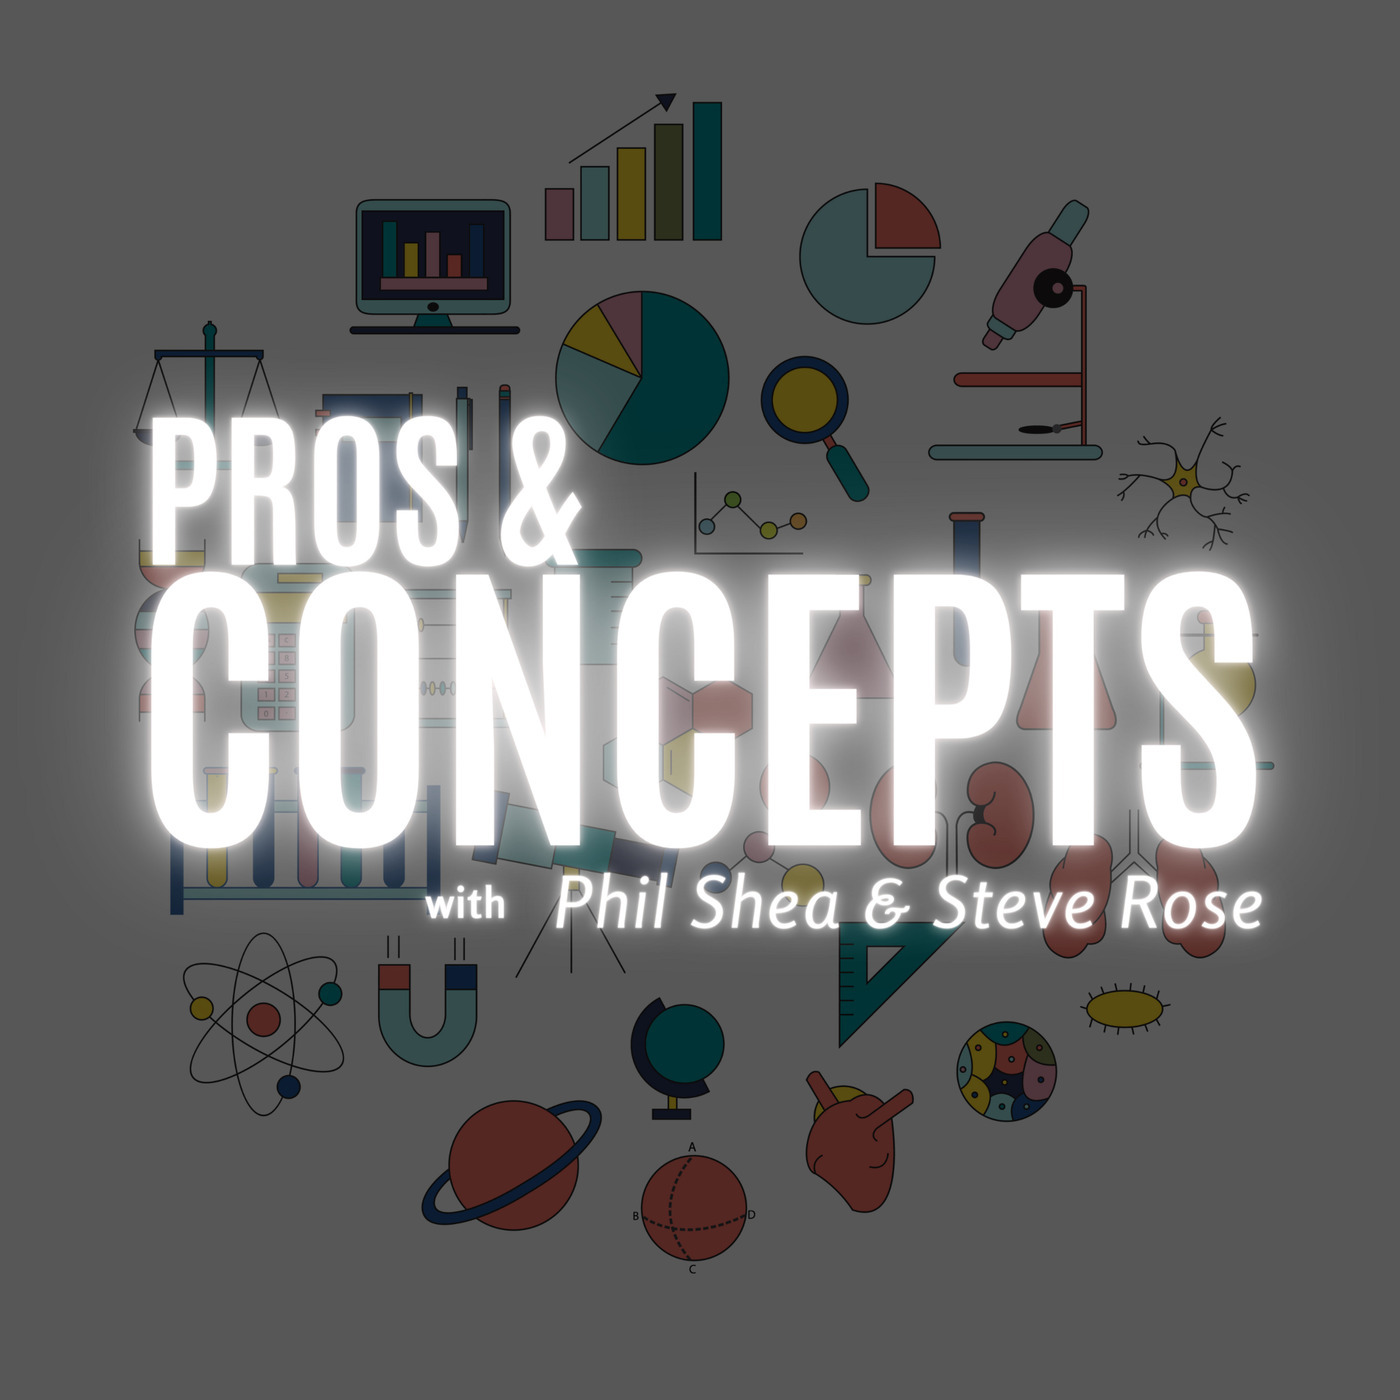 Pros & Concepts 48: Ressentiment – Is it Good to be Weak and Poor?